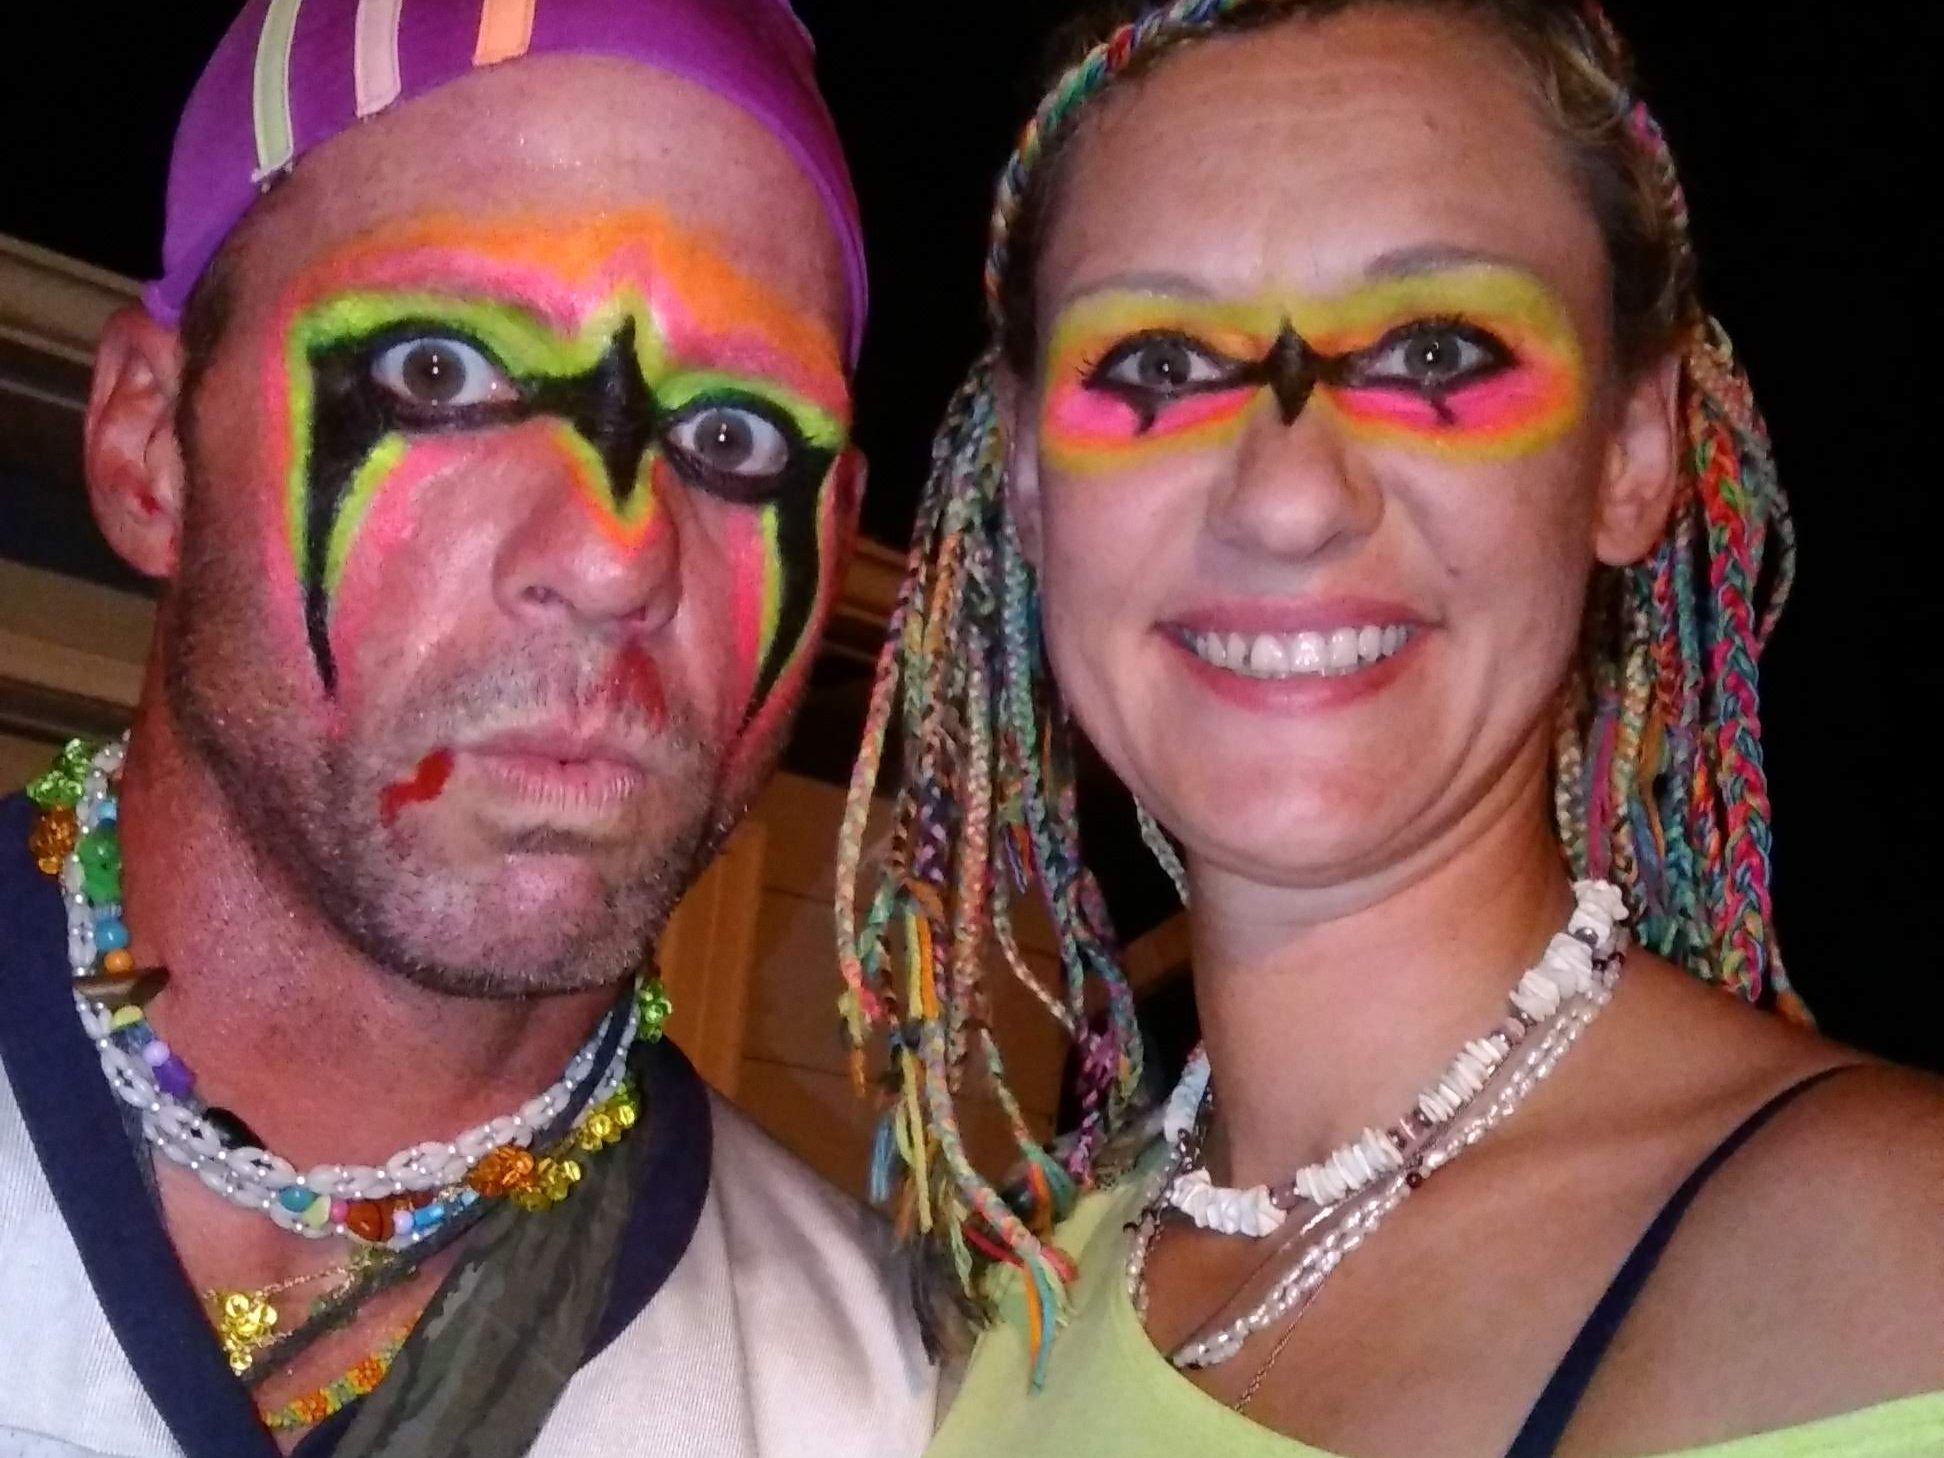 Jim and I in our 'Ultimate Warrior' face paint